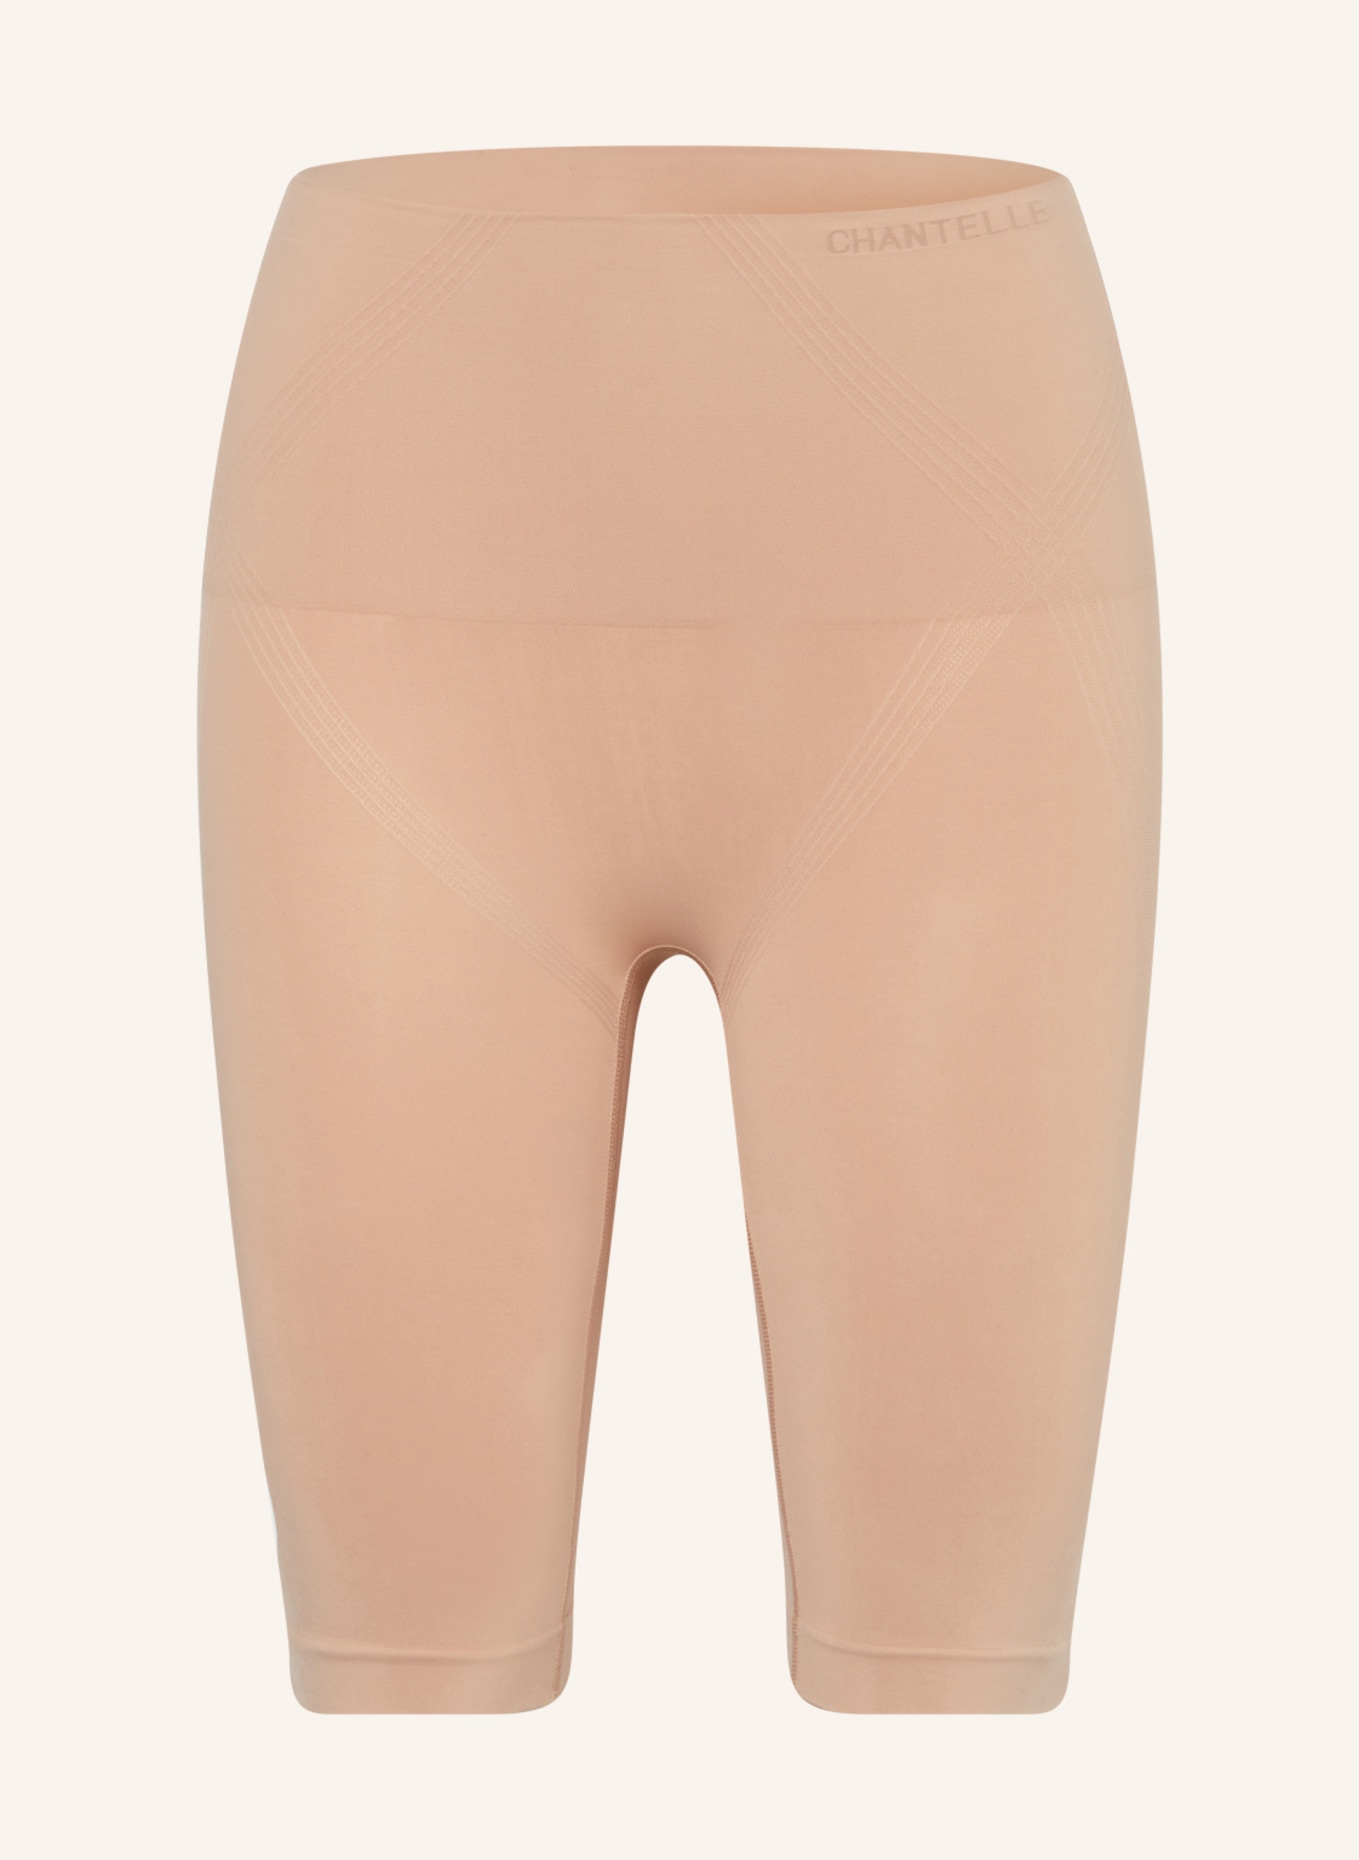 CHANTELLE Shape shorts SMOOTH COMFORT, Color: NUDE (Image 1)